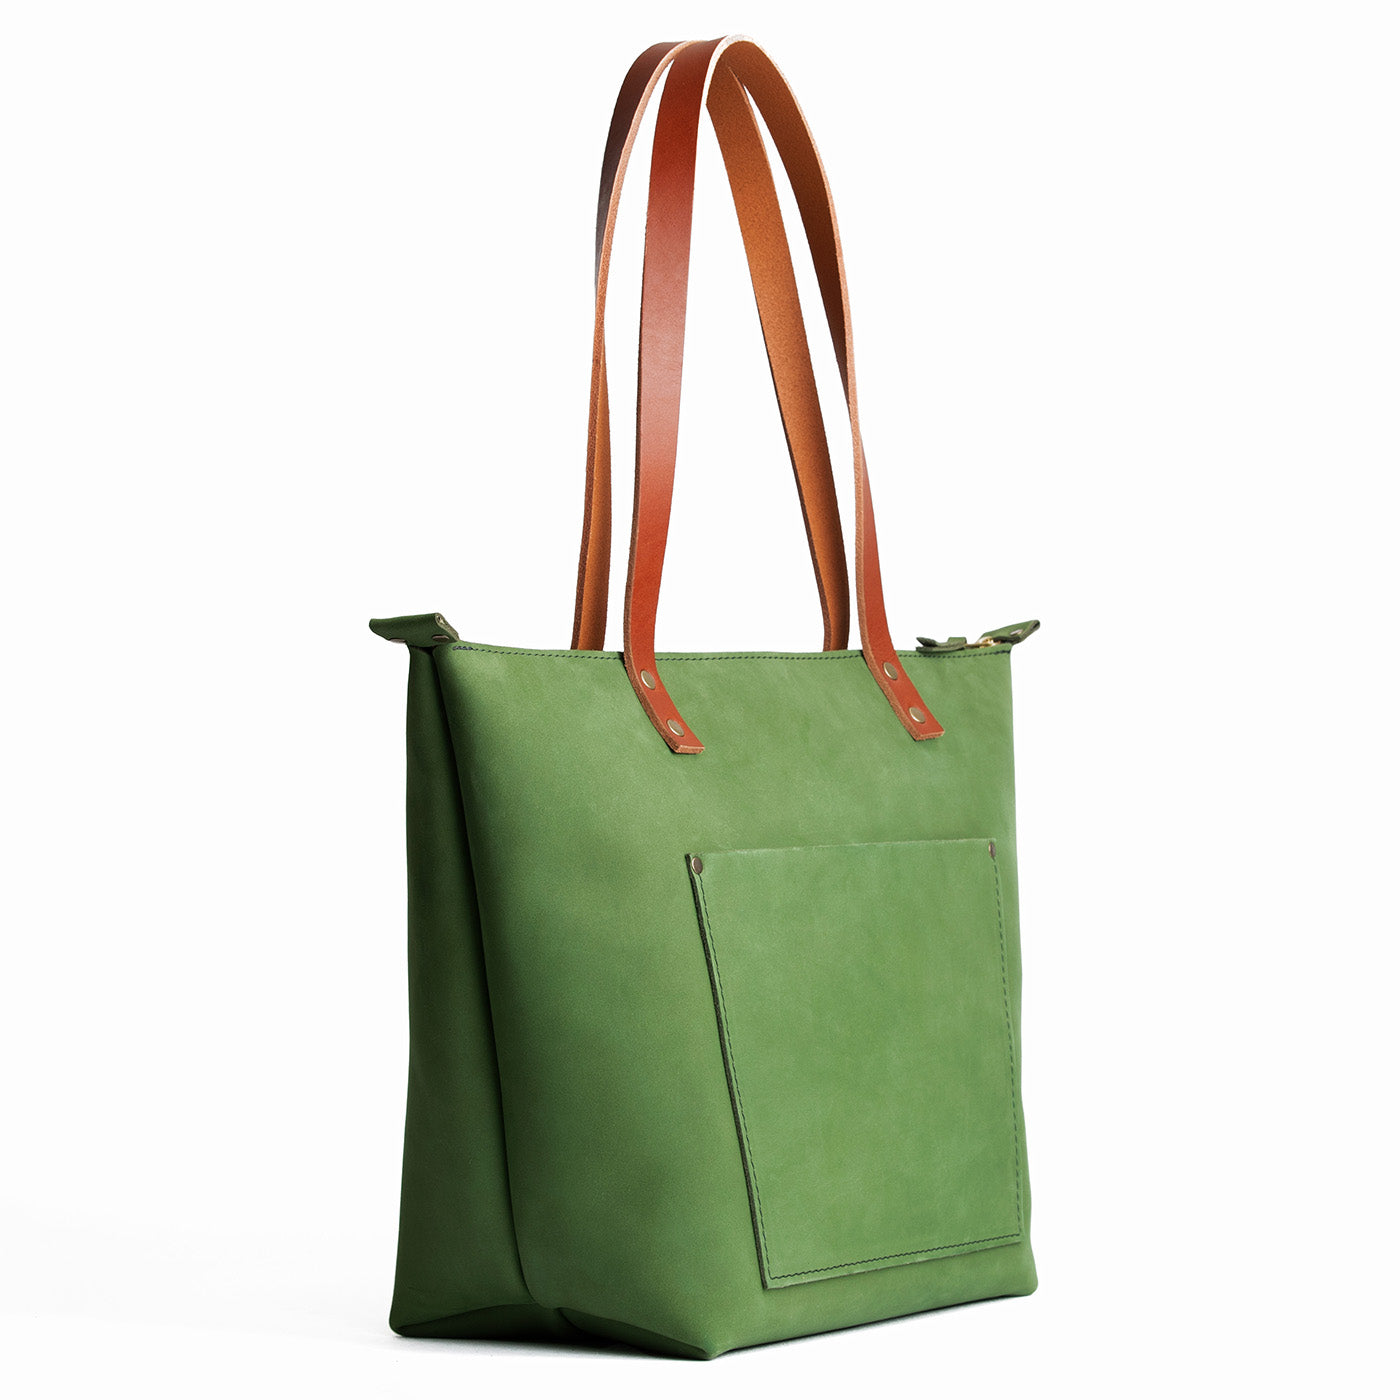 Succulent*Zipper | Large zipper leather tote bag with sturdy bridle handles and front pocket